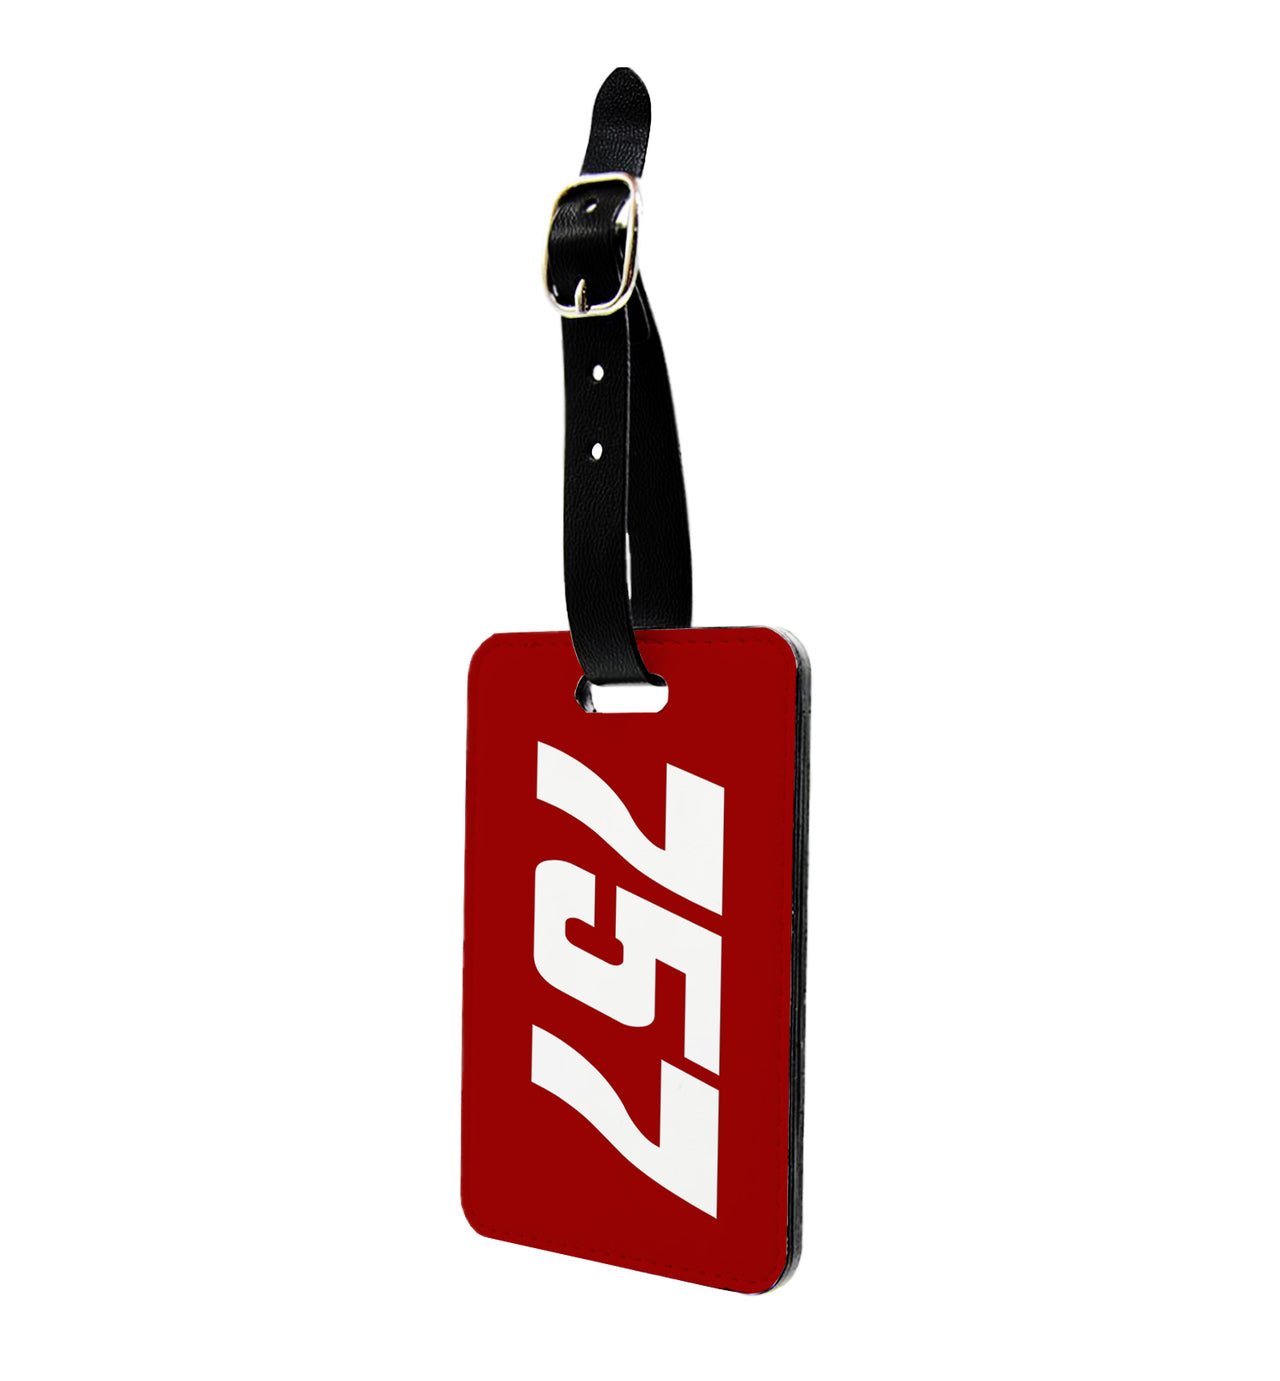 Boeing 757 Text Designed Luggage Tag